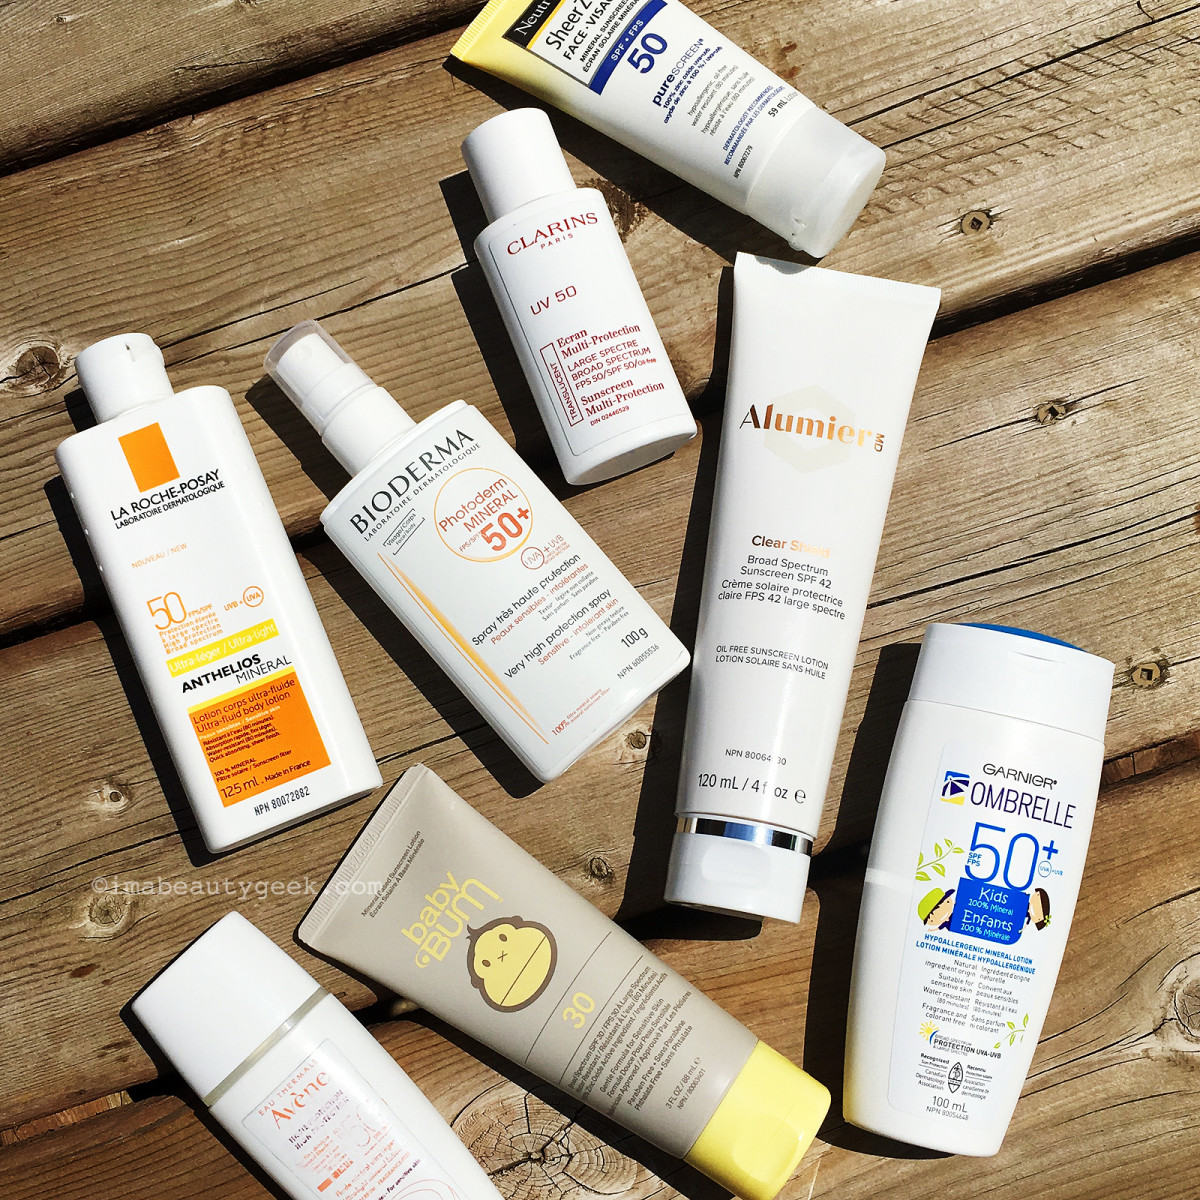 DON'T PUT SERUM, OIL OR FOUNDATION IN SUNSCREEN! - Beautygeeks